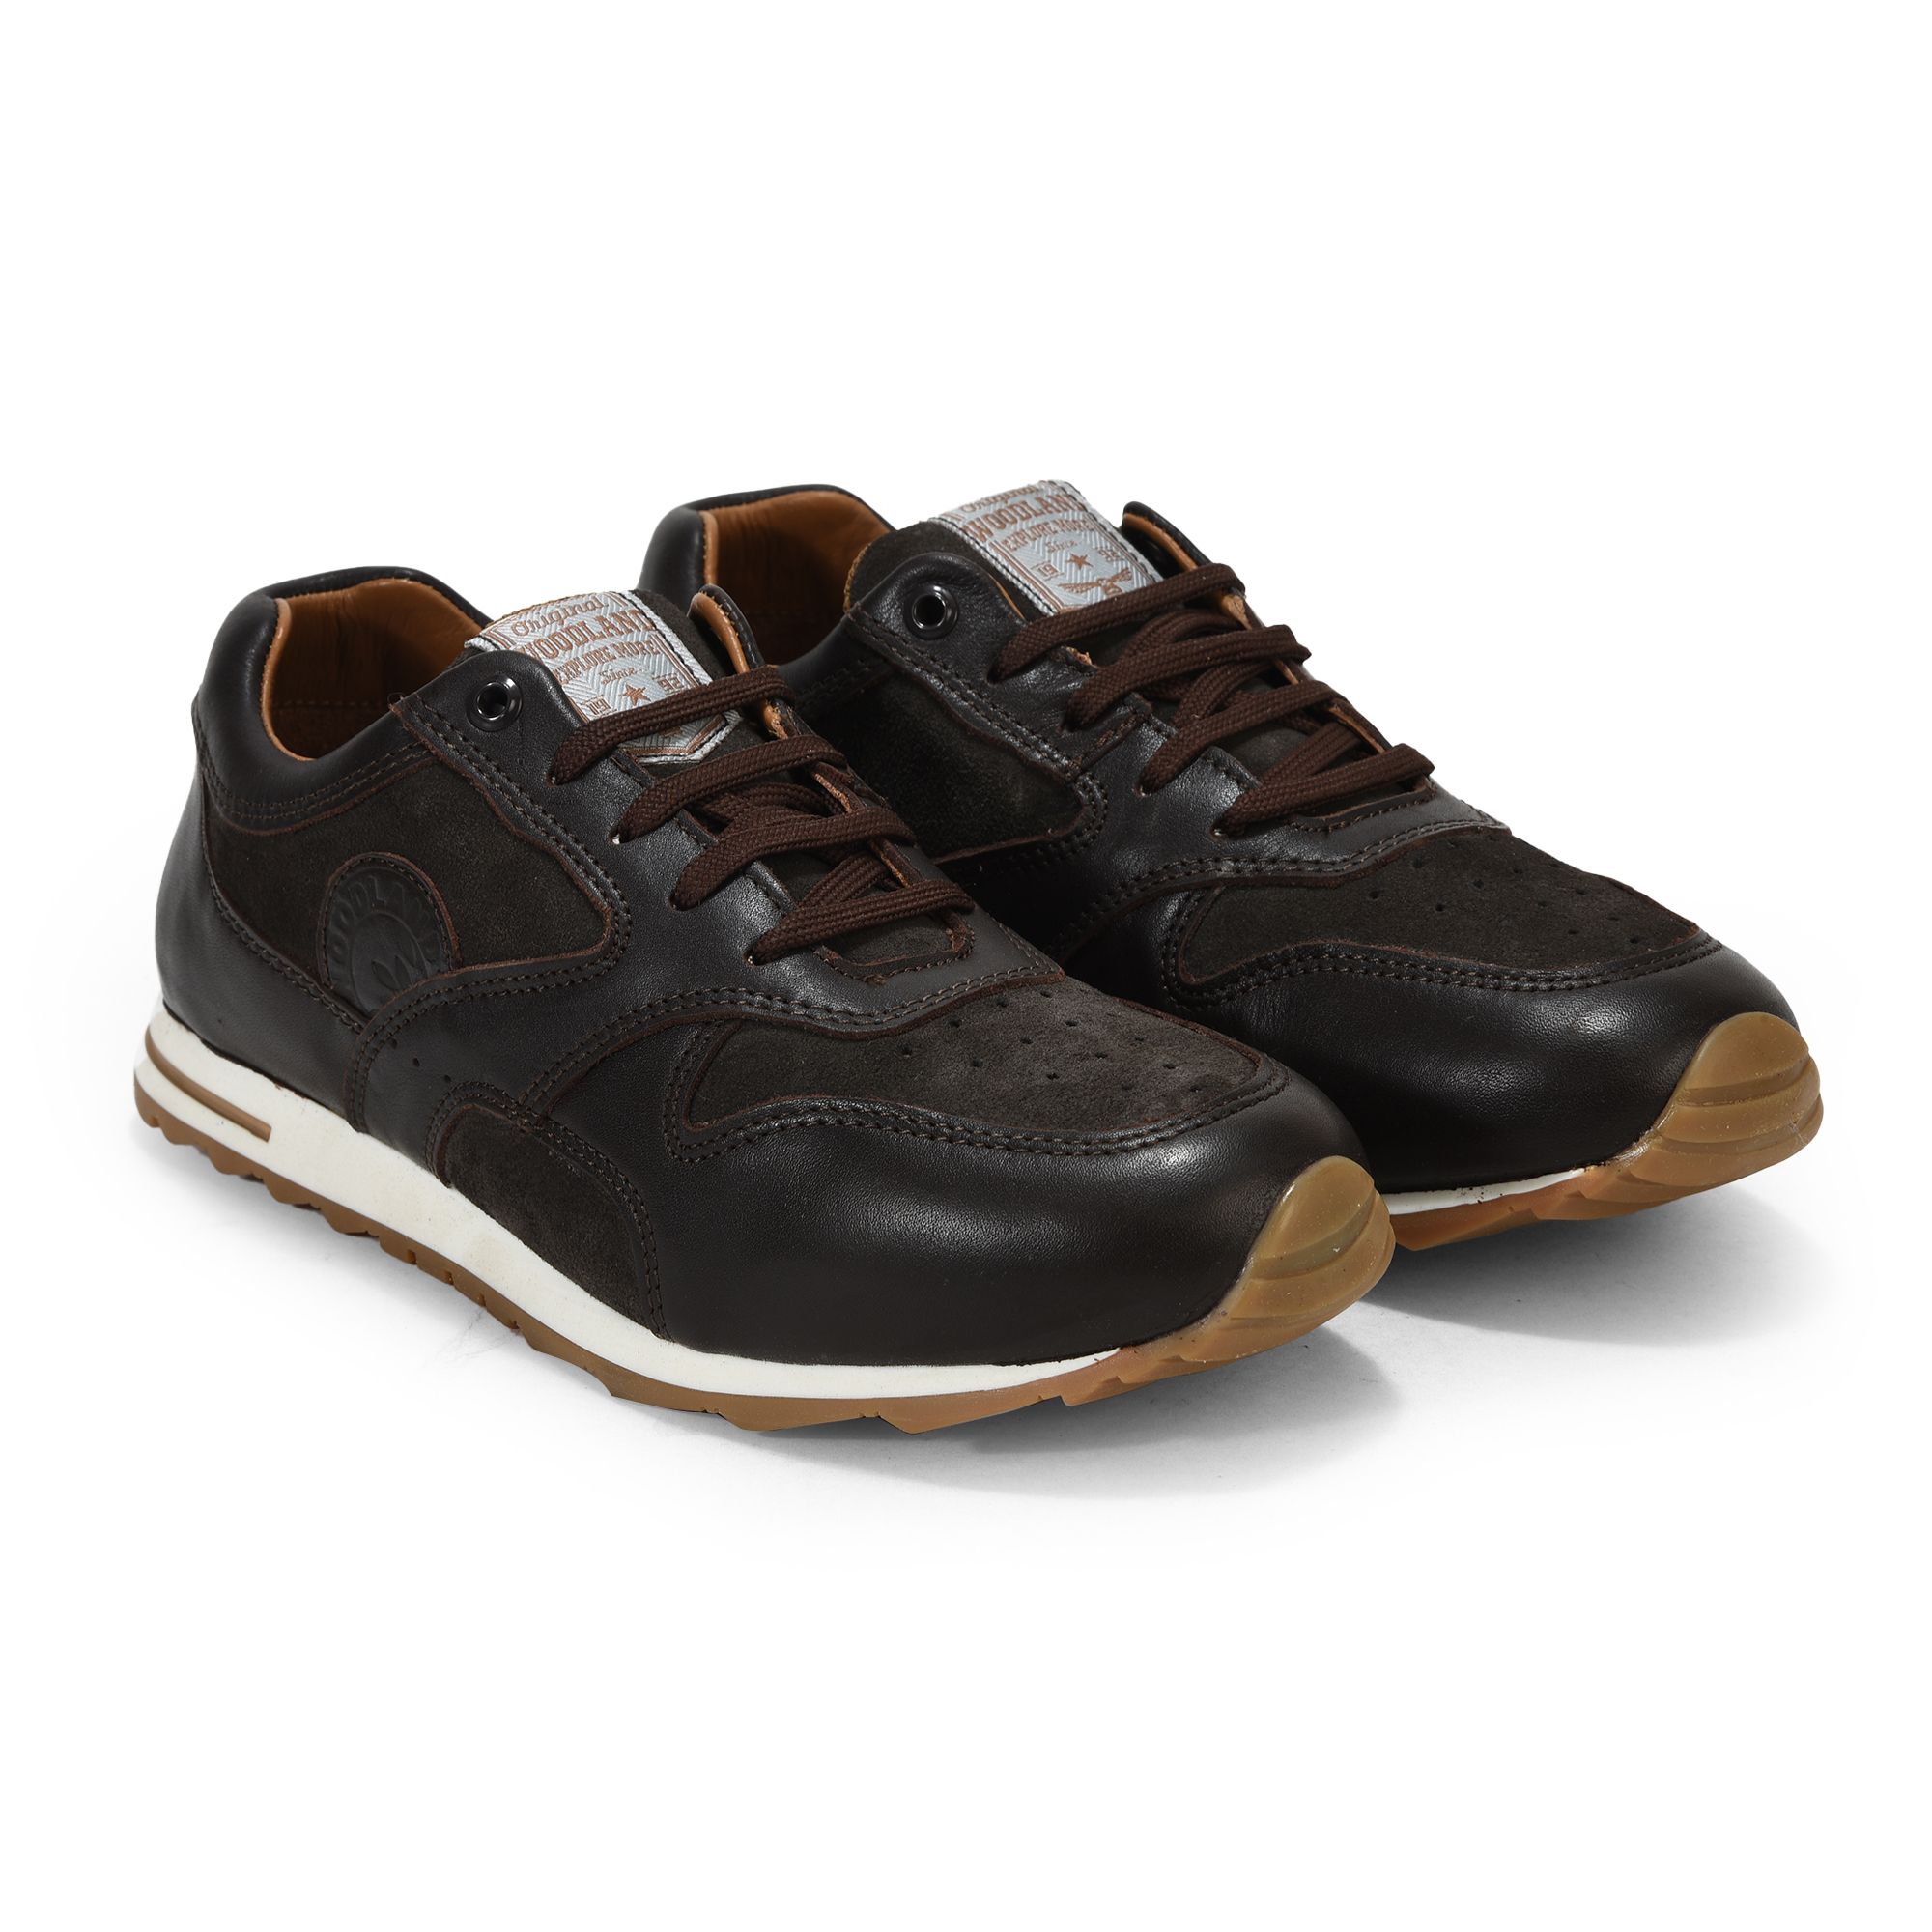 DBROWN casual shoes for men